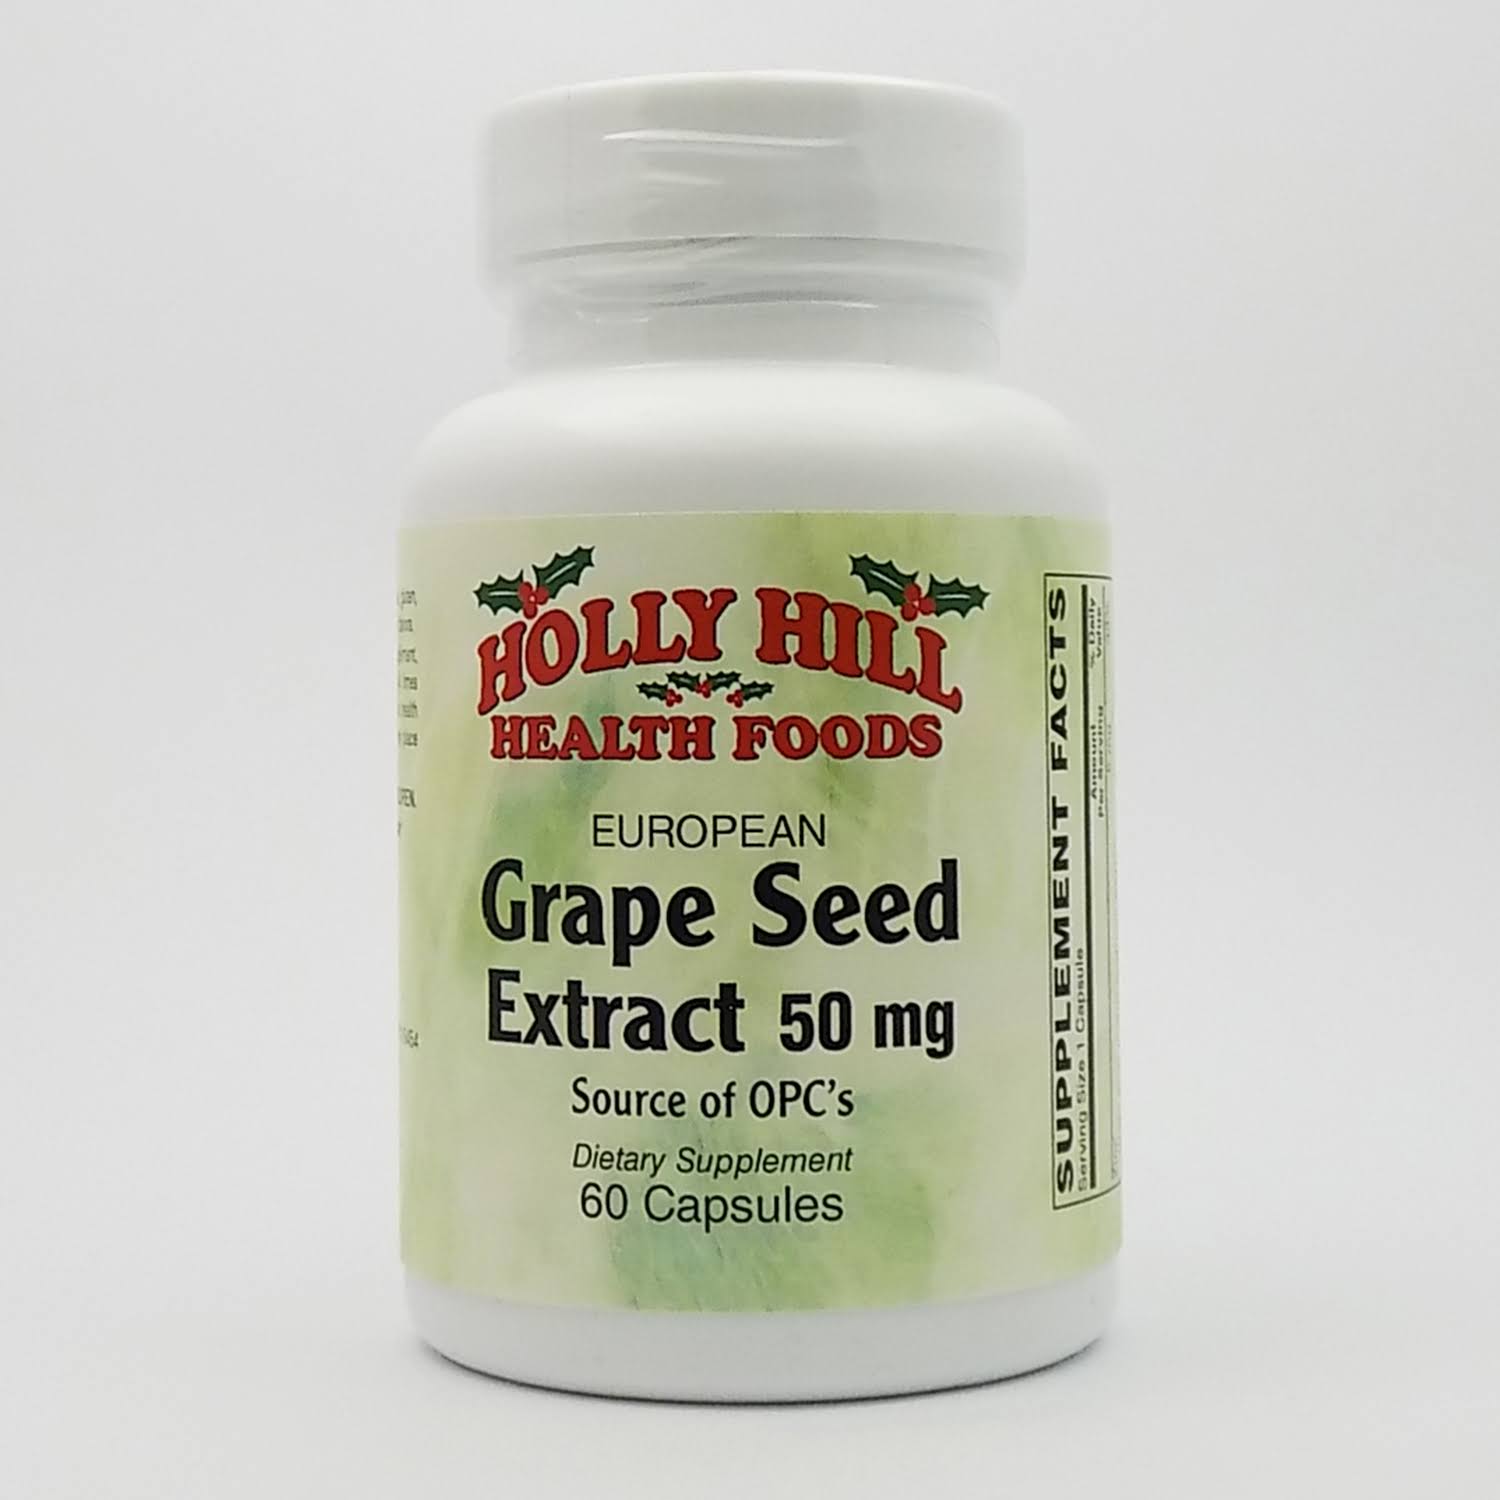 Holly Hill Health Foods, European Grape Seed Extract 50 mg, 60 Capsules